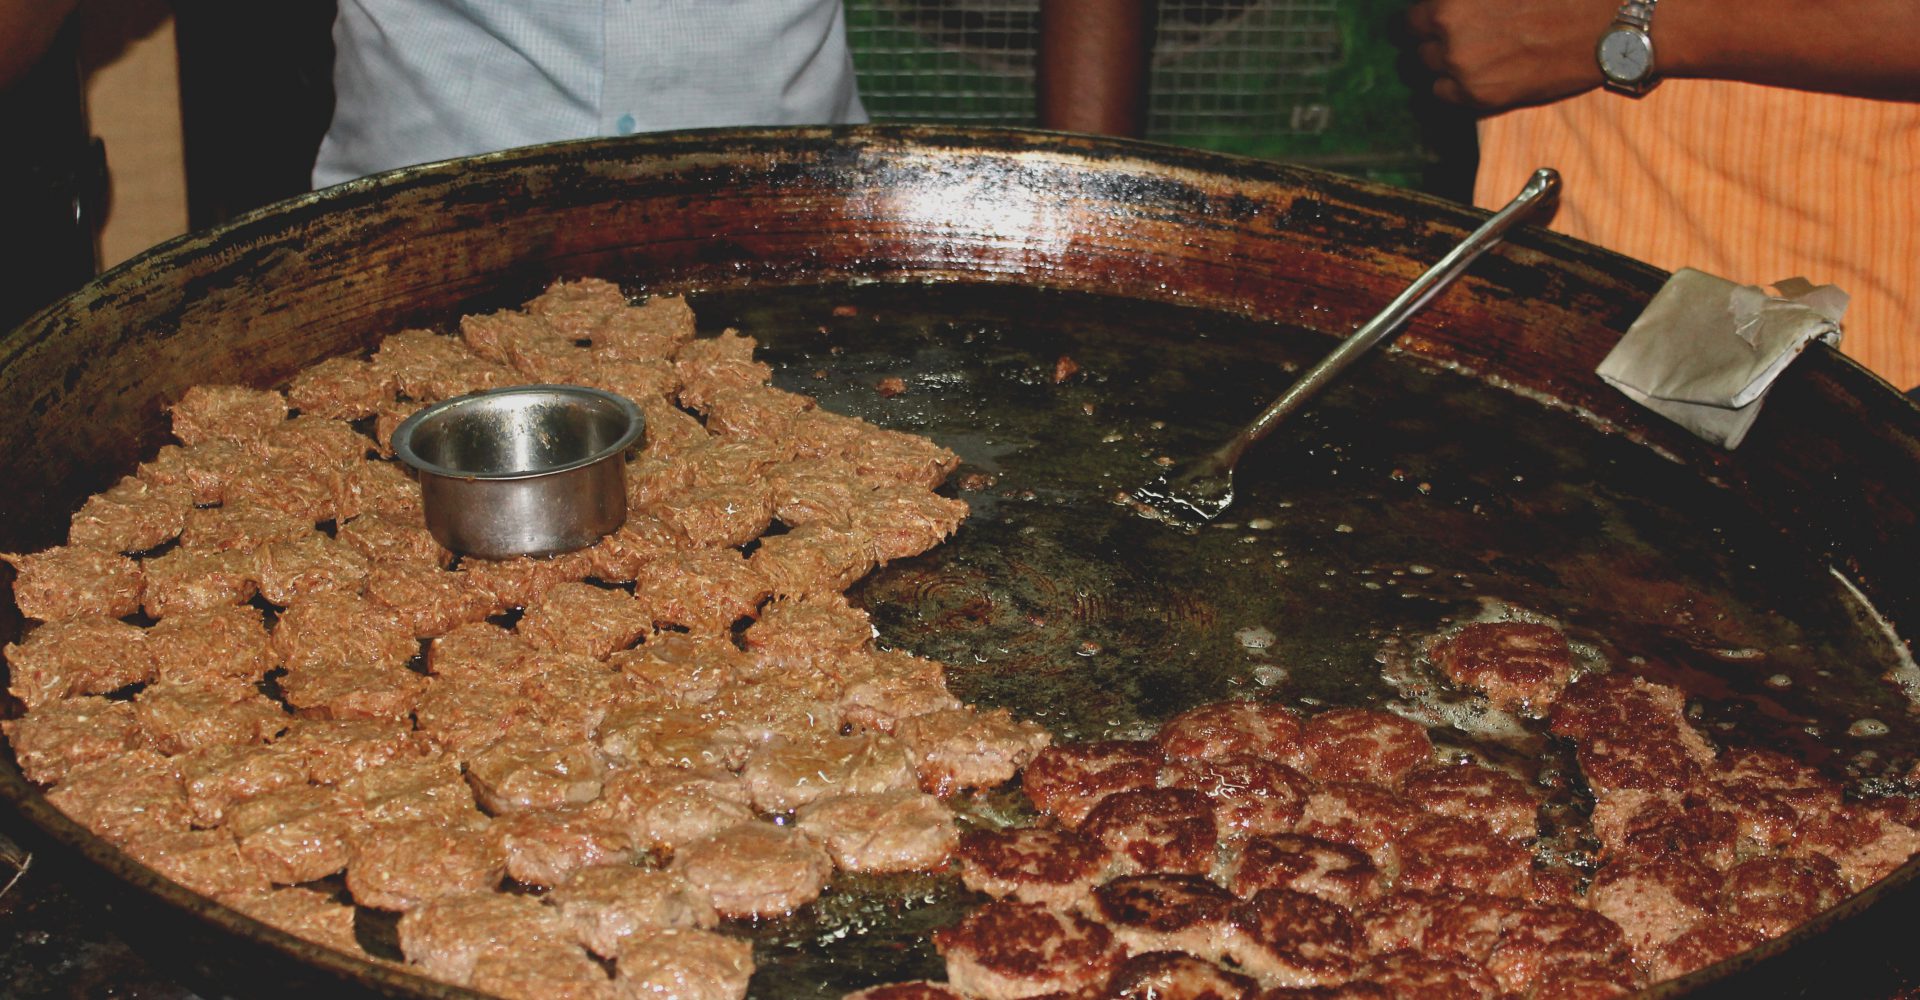 Picture of the famous galawati kebabs from Lucknow, India